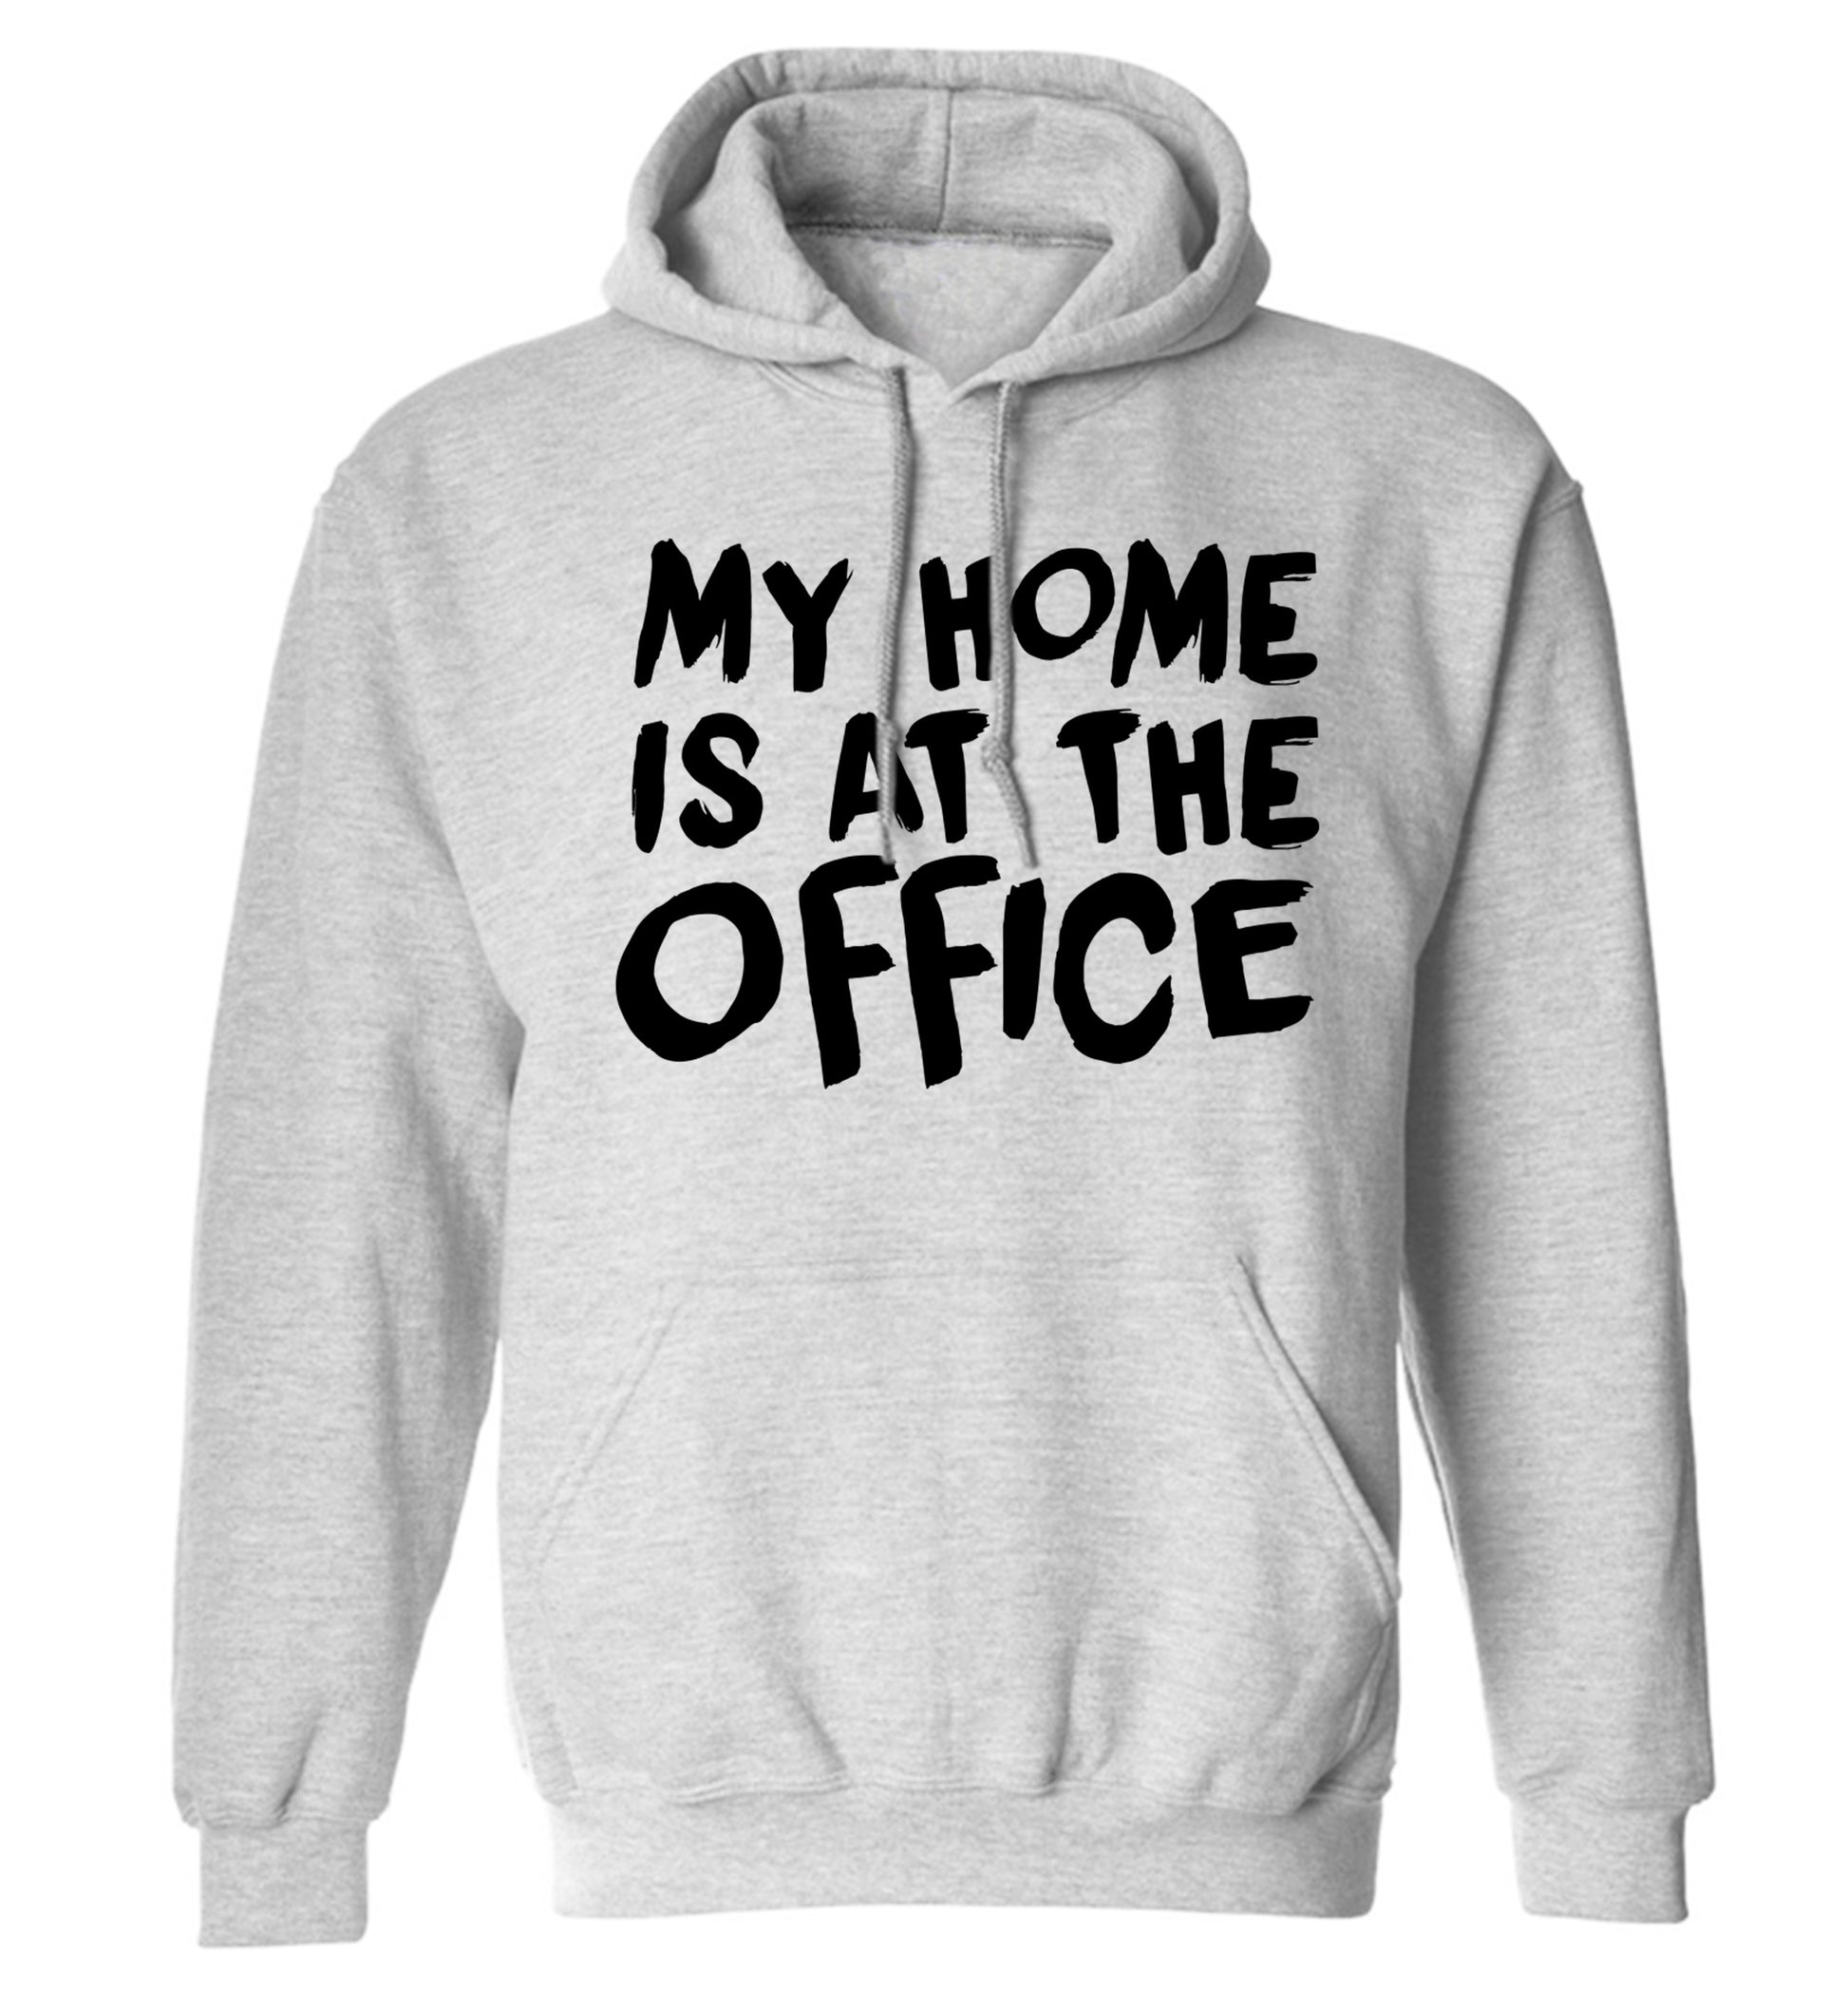 My home is at the office adults unisex grey hoodie 2XL